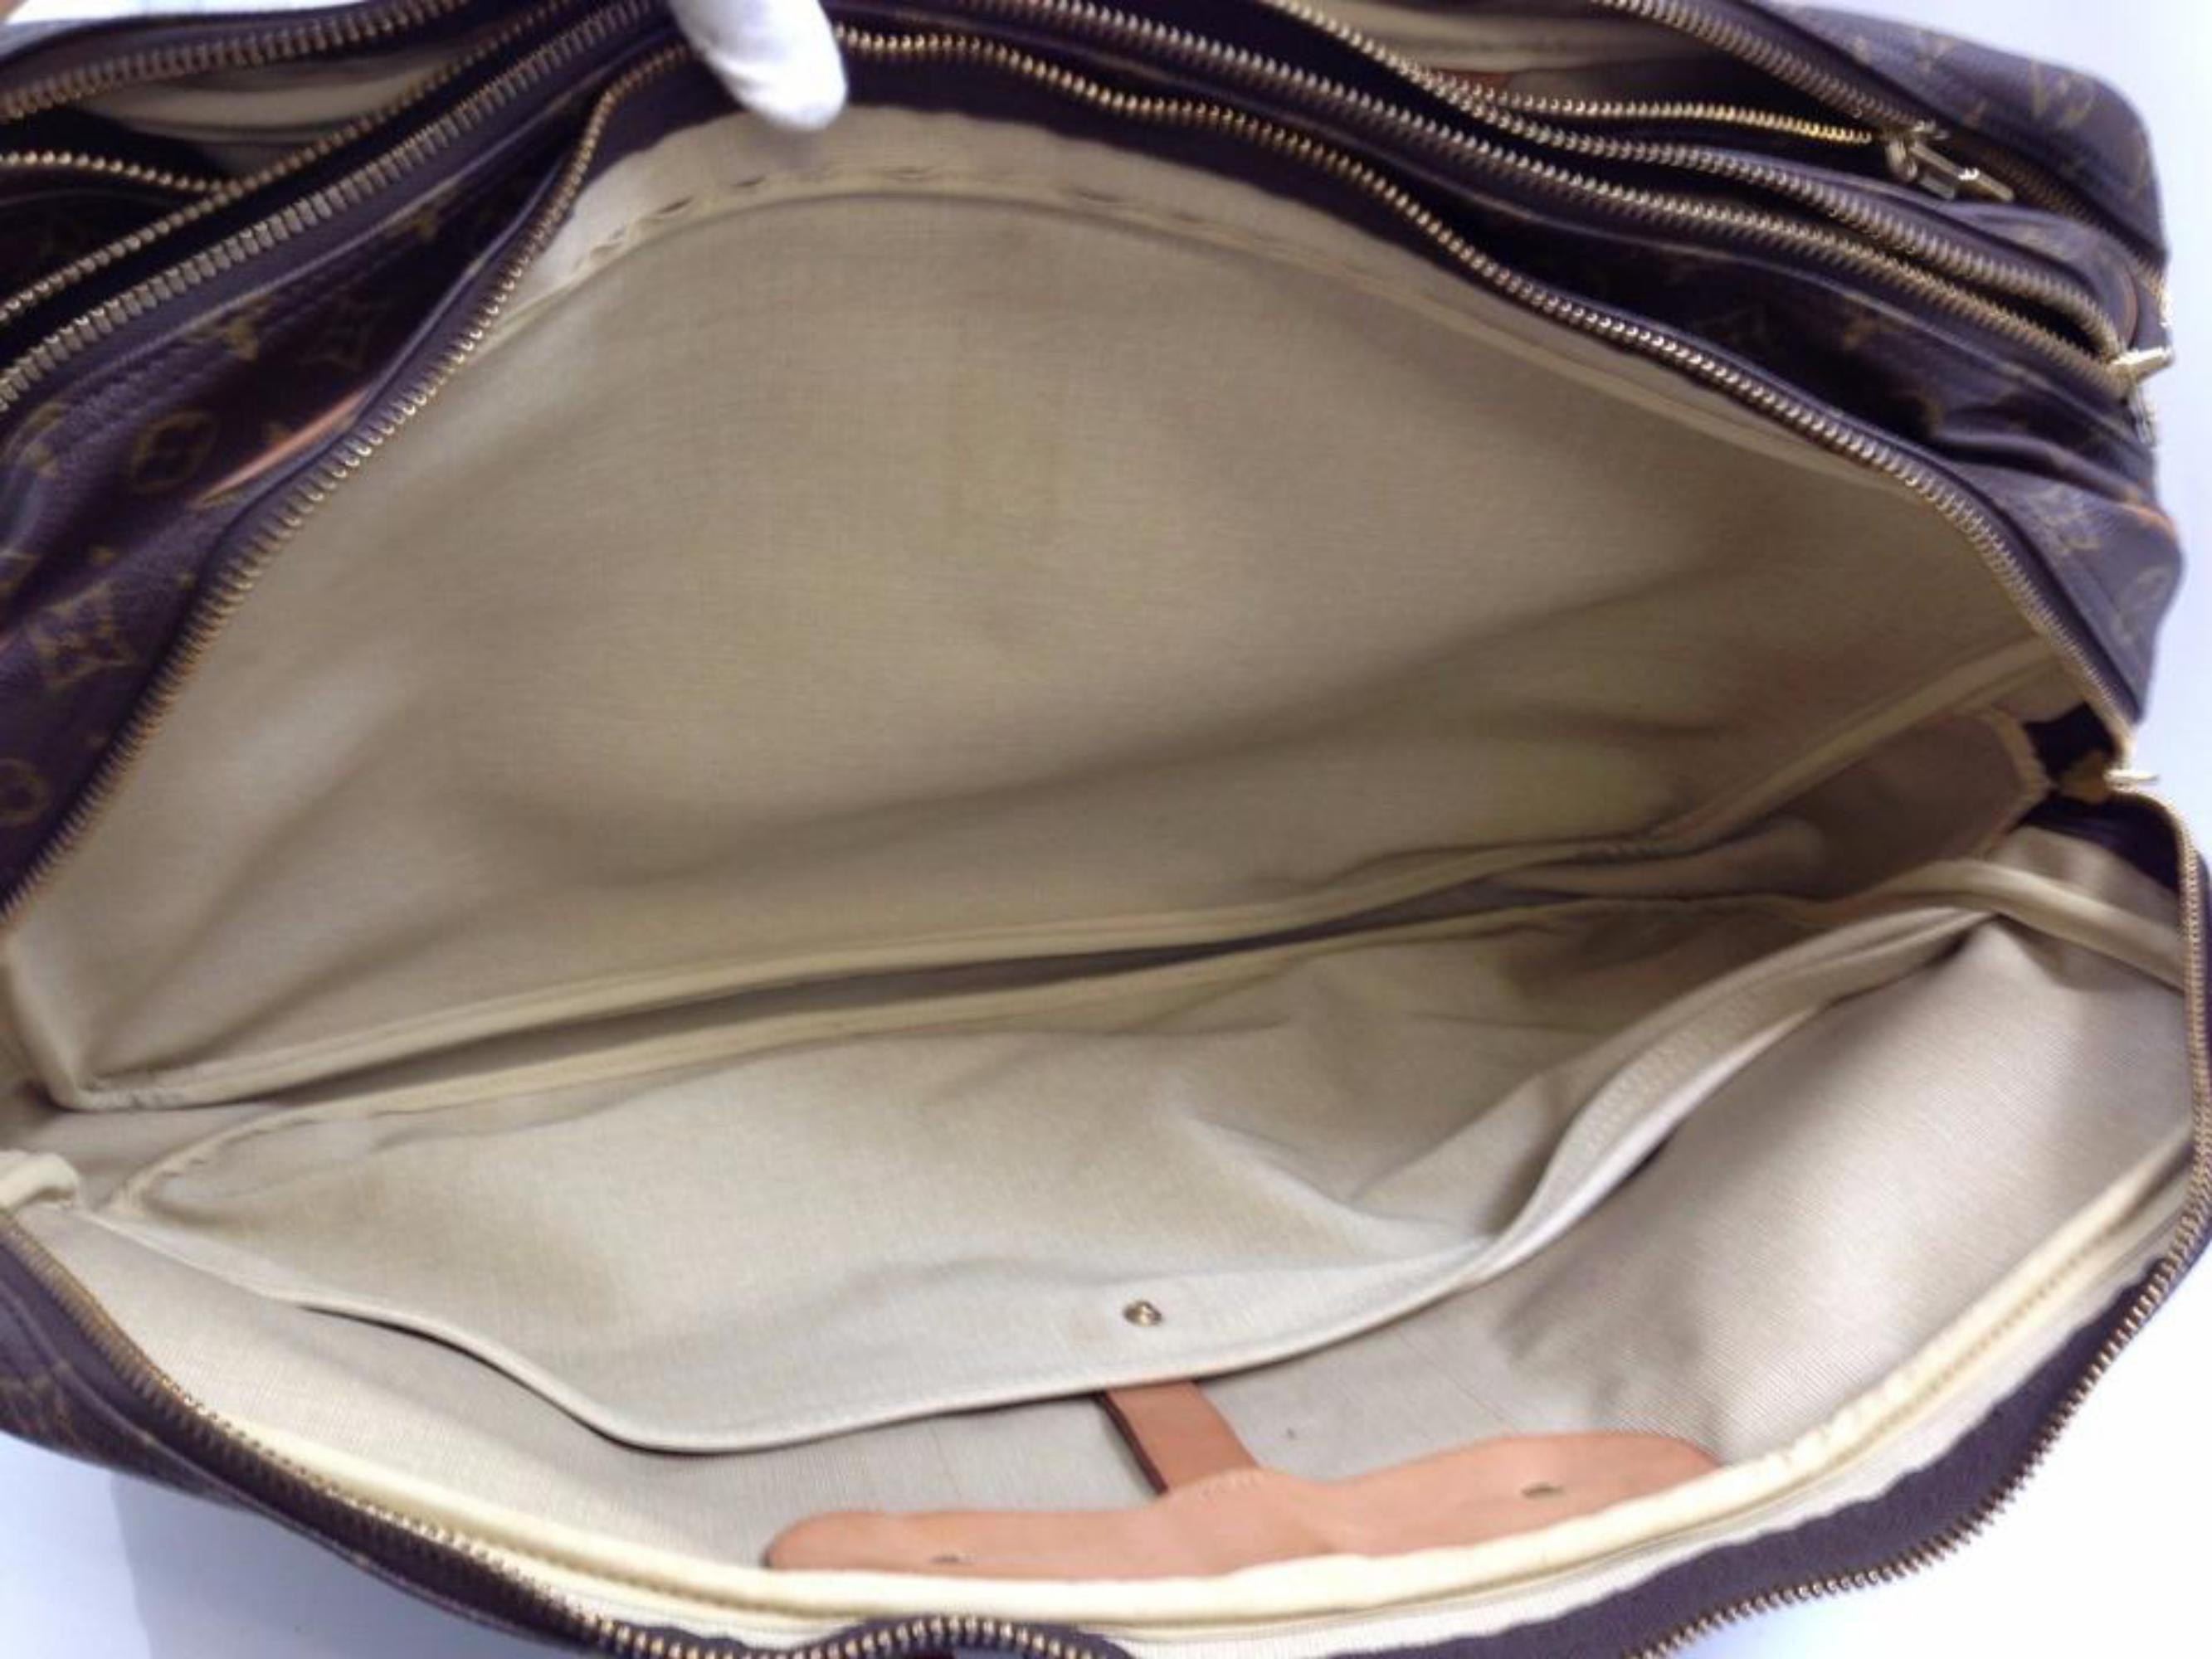 Louis Vuitton 3 Poches 55 169556 Monogram Canvas Weekend/Travel Bag In Fair Condition For Sale In Forest Hills, NY